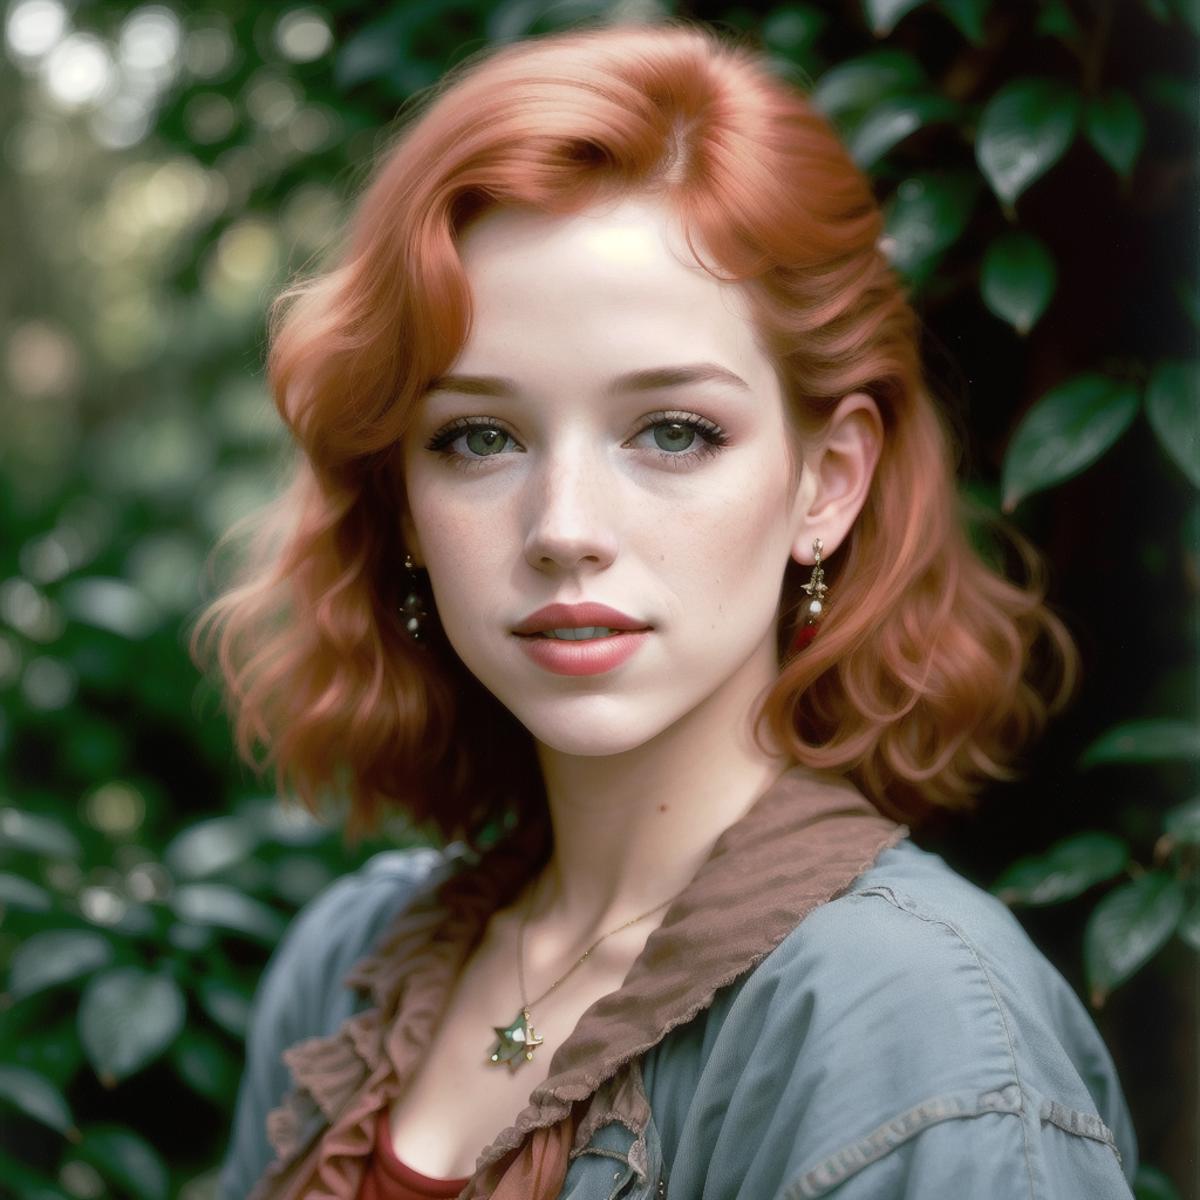 Molly Ringwald Younger years image